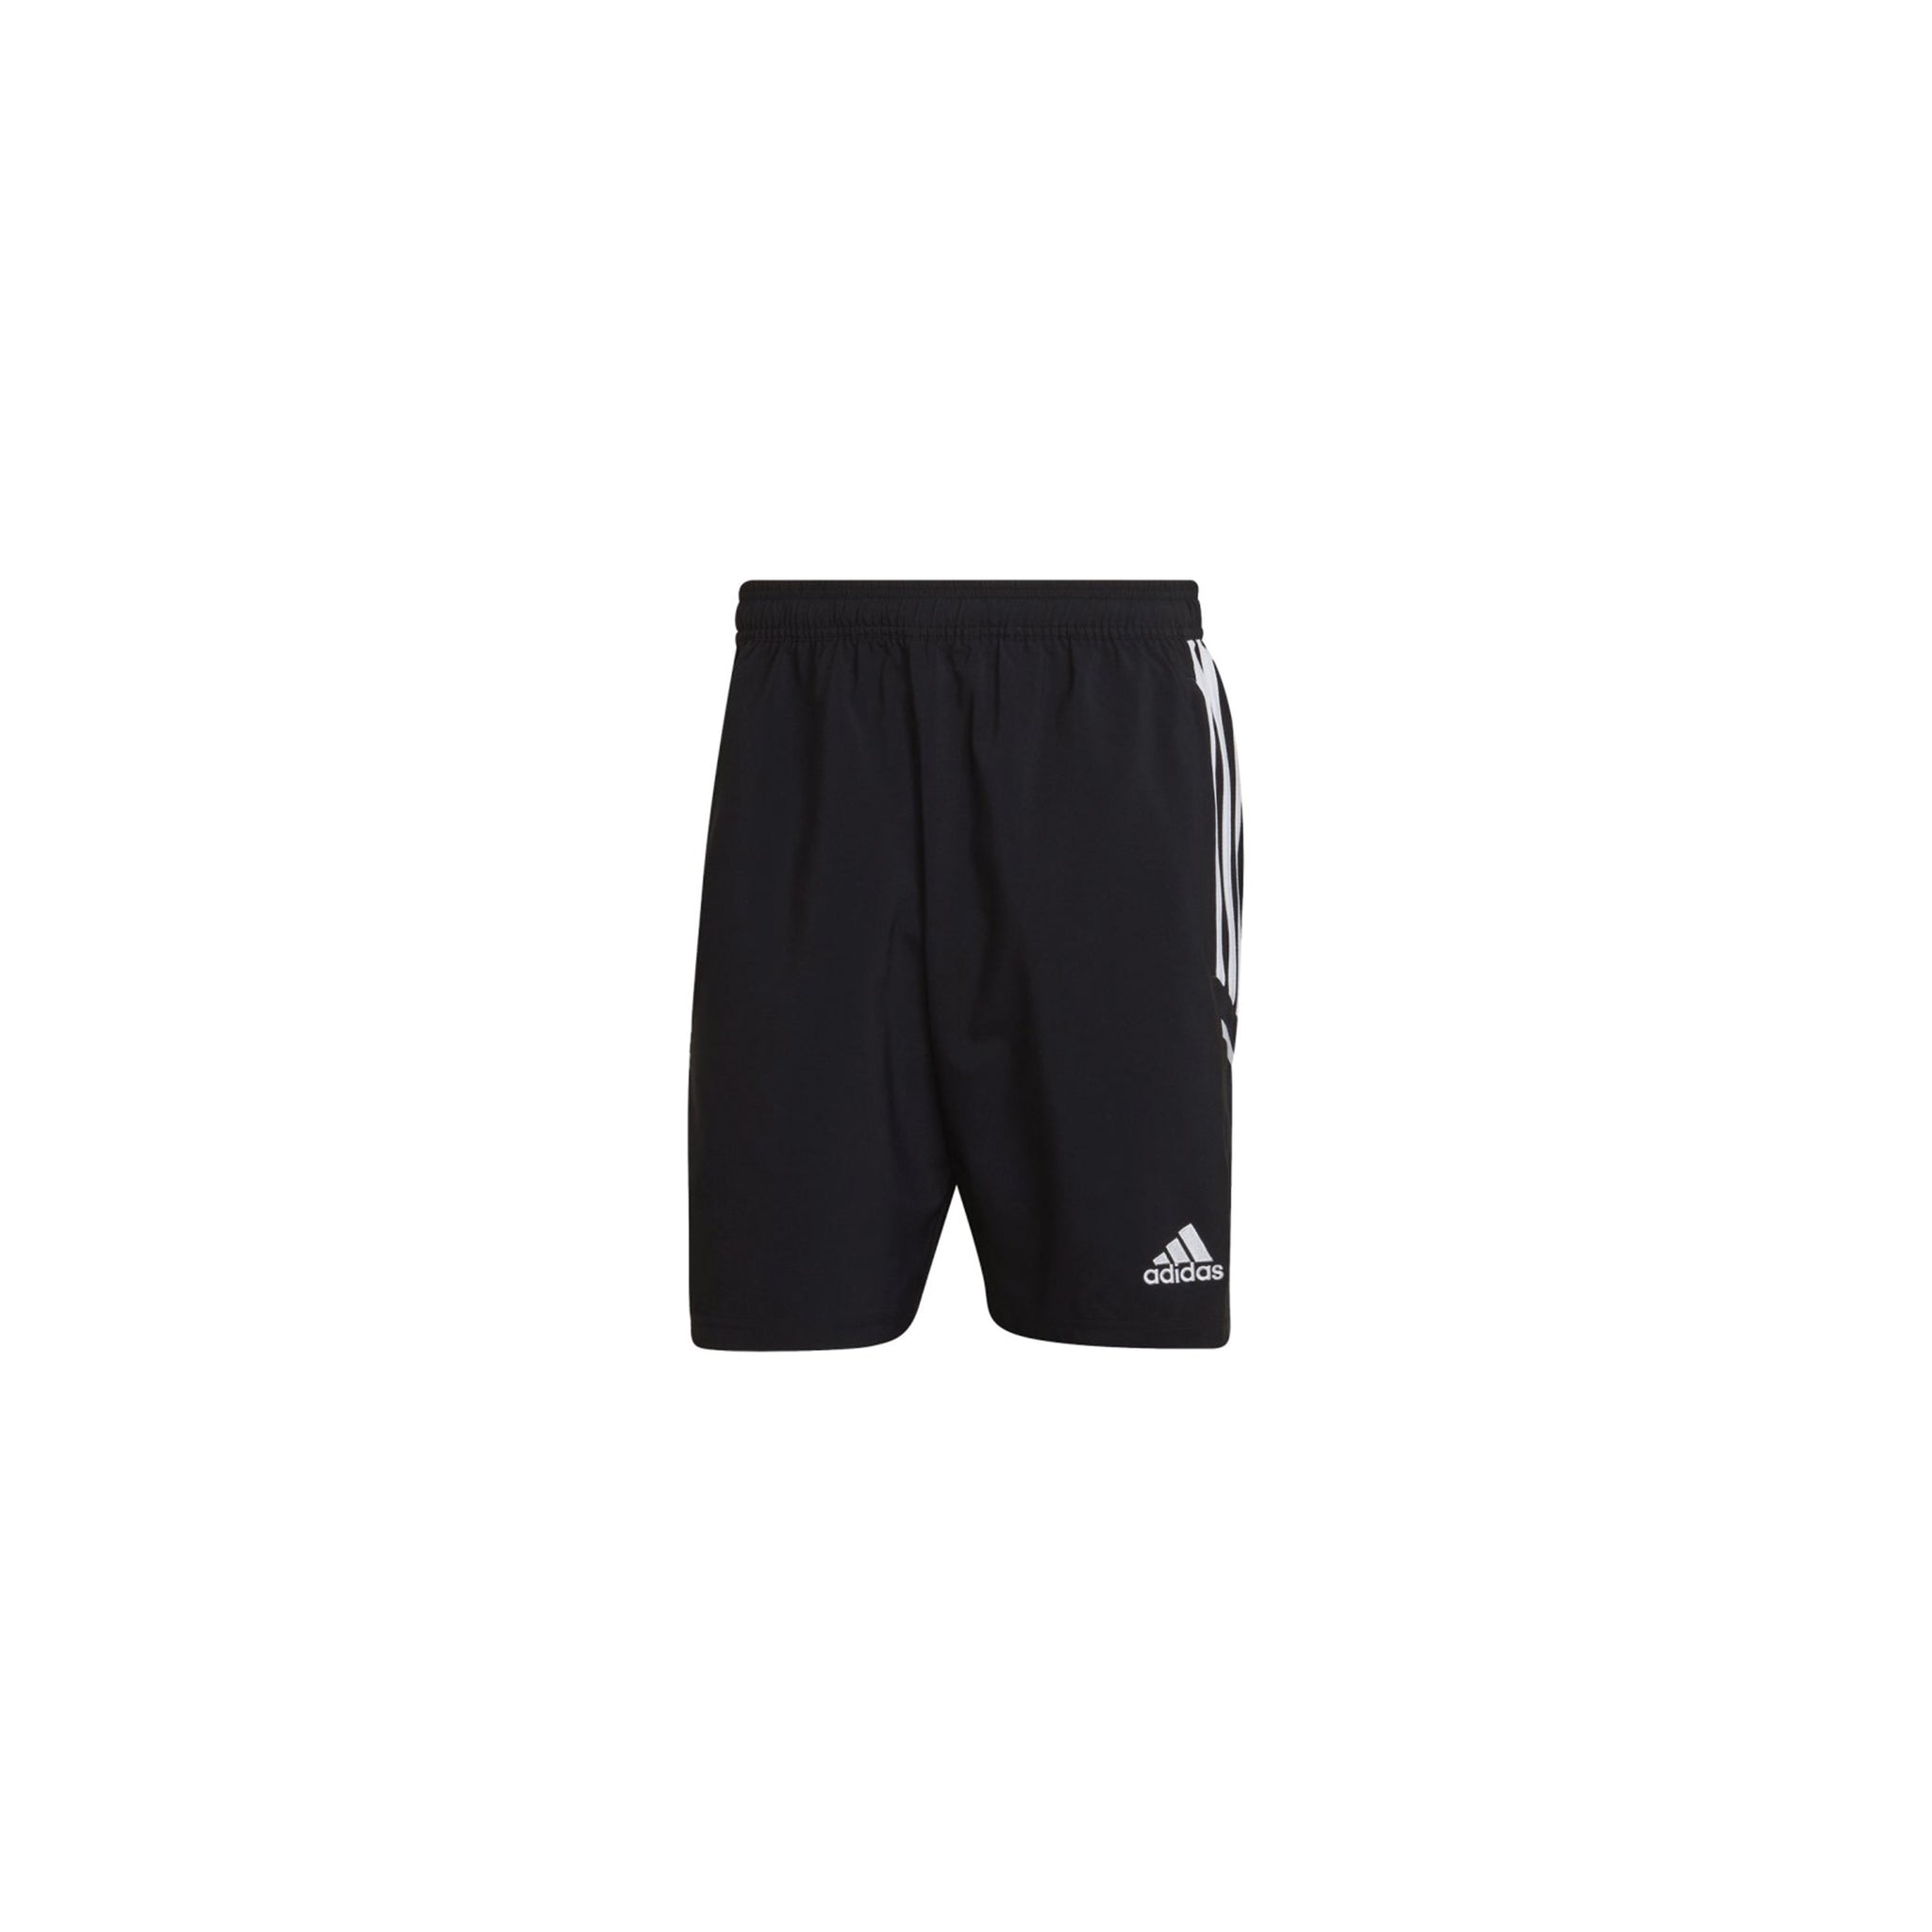 ADIDAS Condivo 22 Downtime Shorts